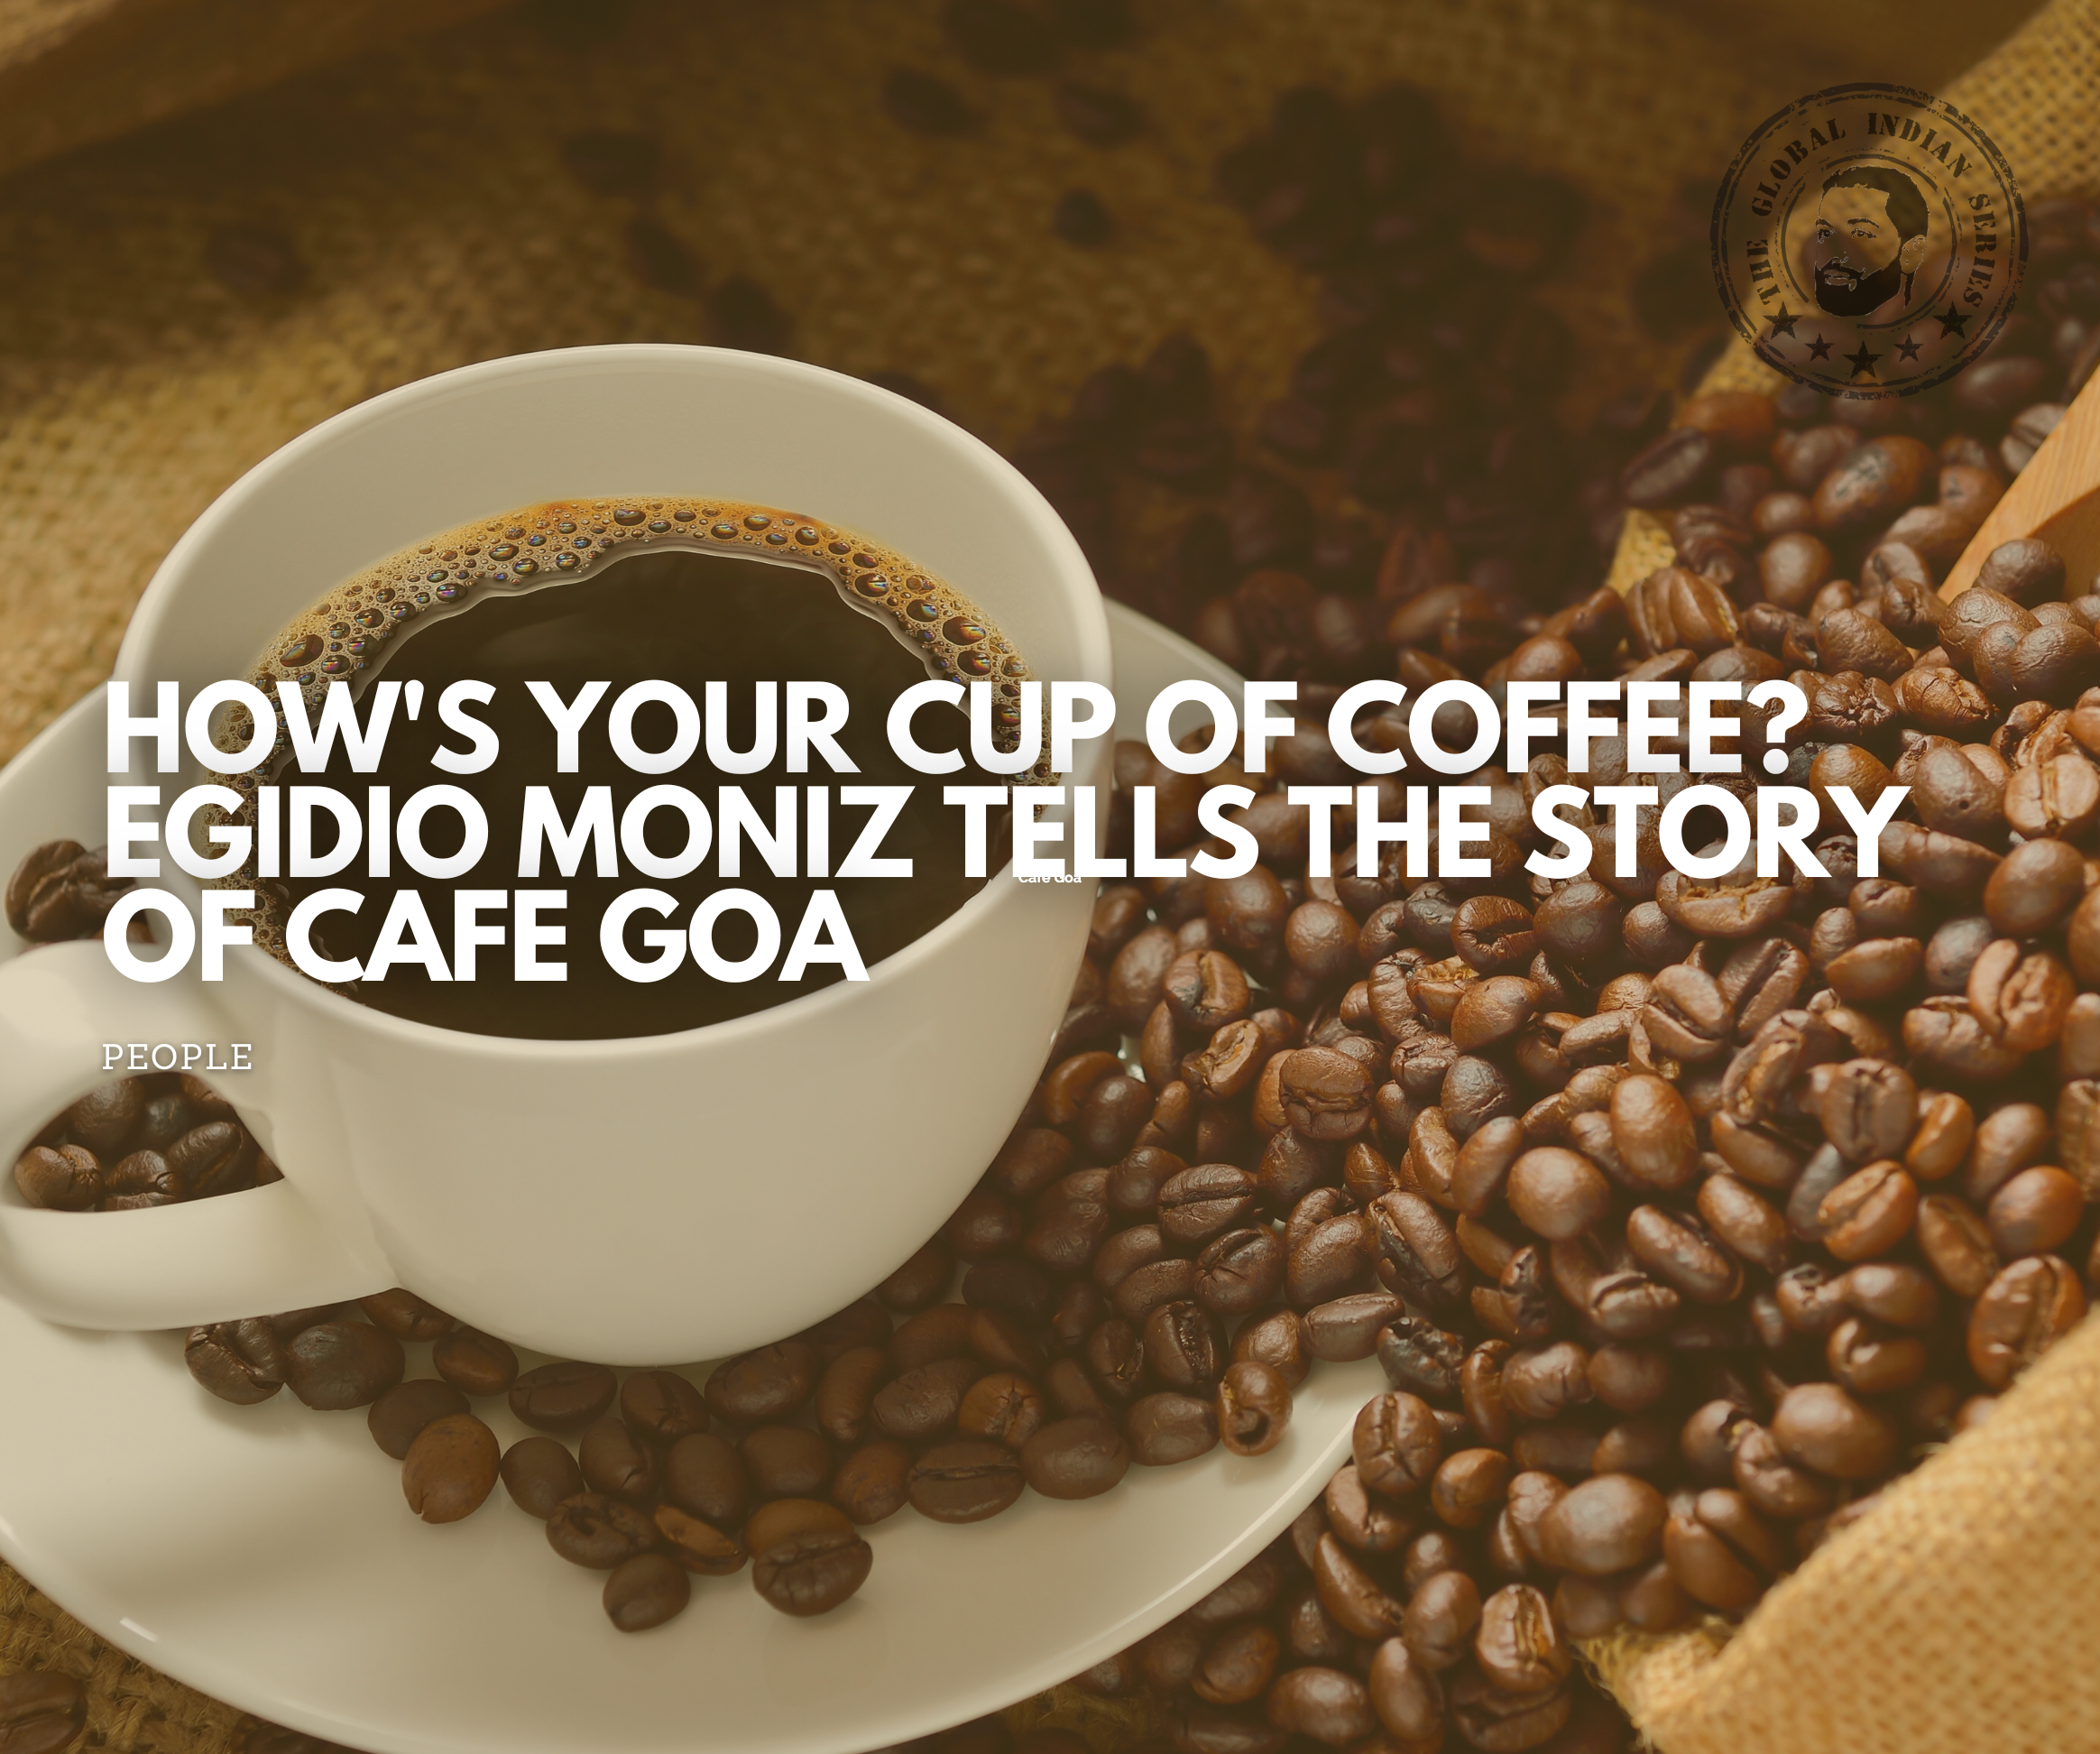 How’s Your Cup Of Coffee? Gidio Moniz tells the story of Café Goa, a passion who has made the perfect cup of coffee his mission.